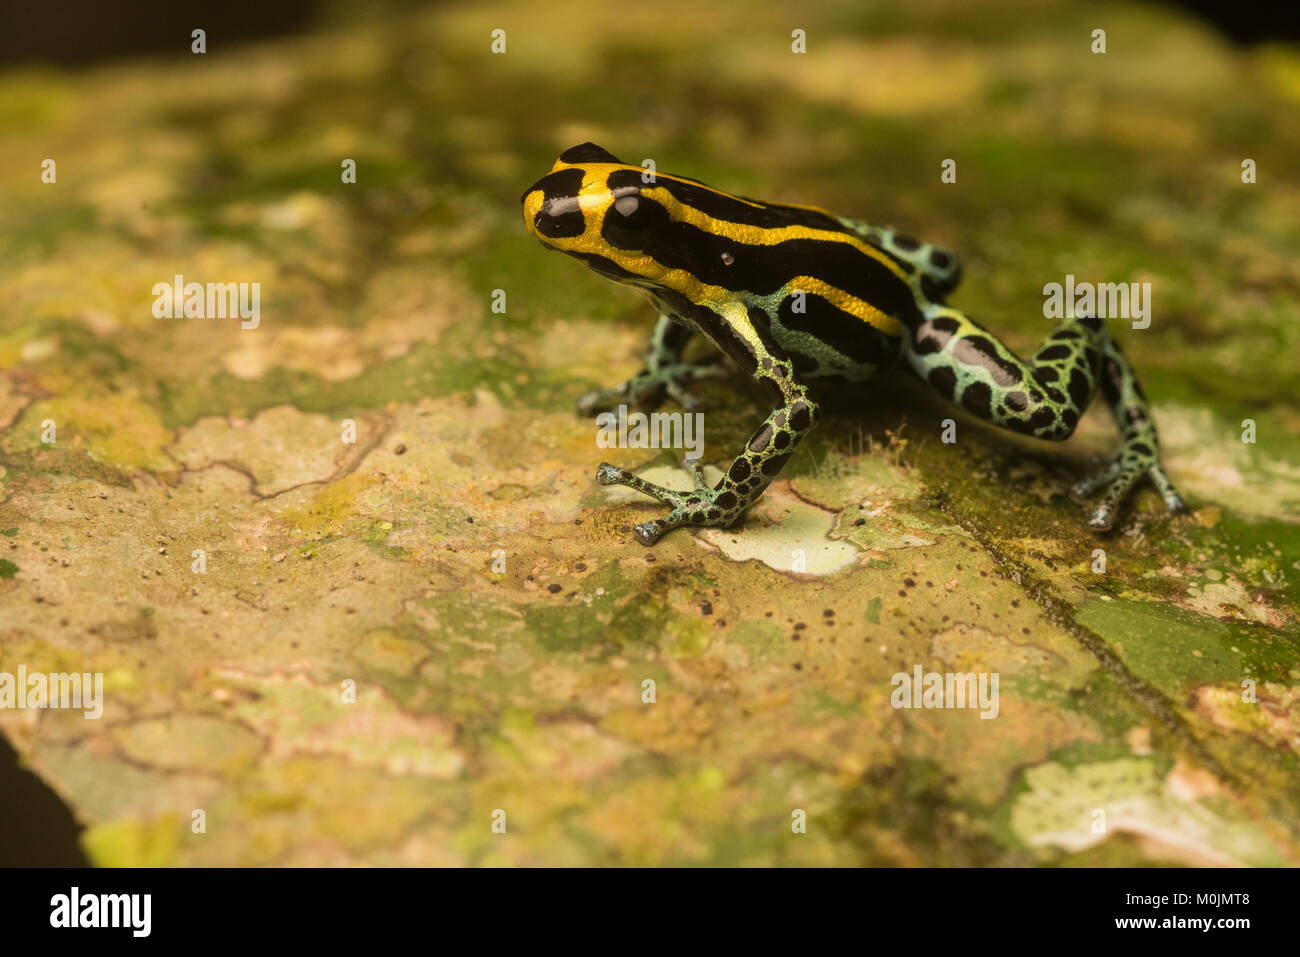 Poison frog in the family Dendrobatidae are known for their bright colors and toxic nature.  This is Ranitomeya ventrimaculata, a small shy species. Stock Photo